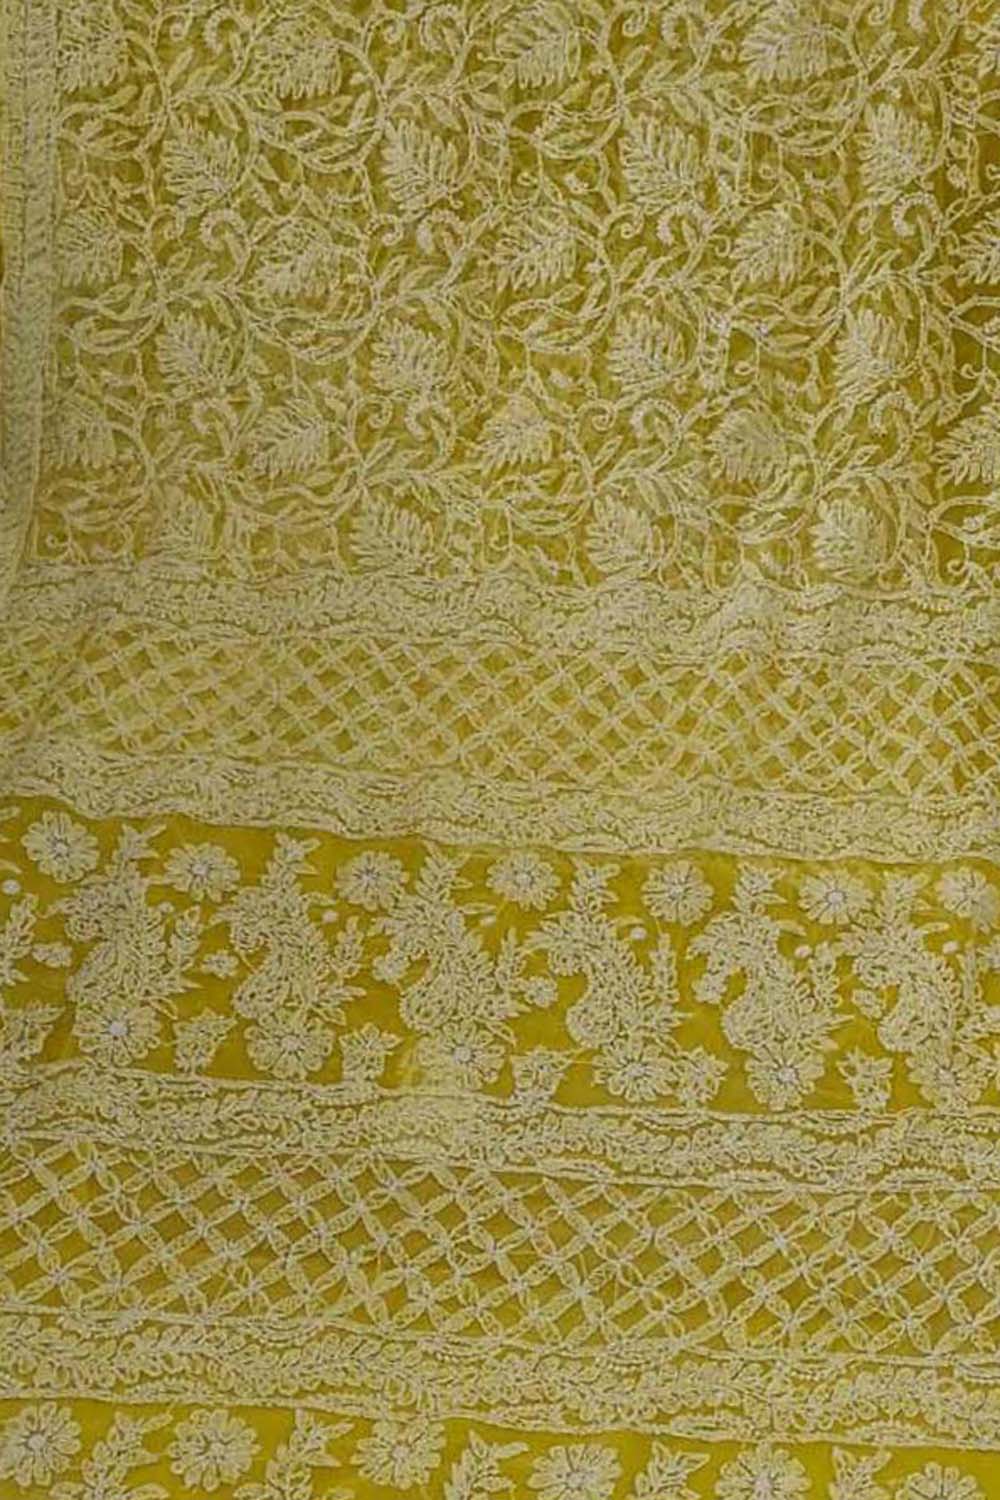 Shop the Latest Yellow Chikankari Georgette Saree with Hand Embroidery - Buy Now!